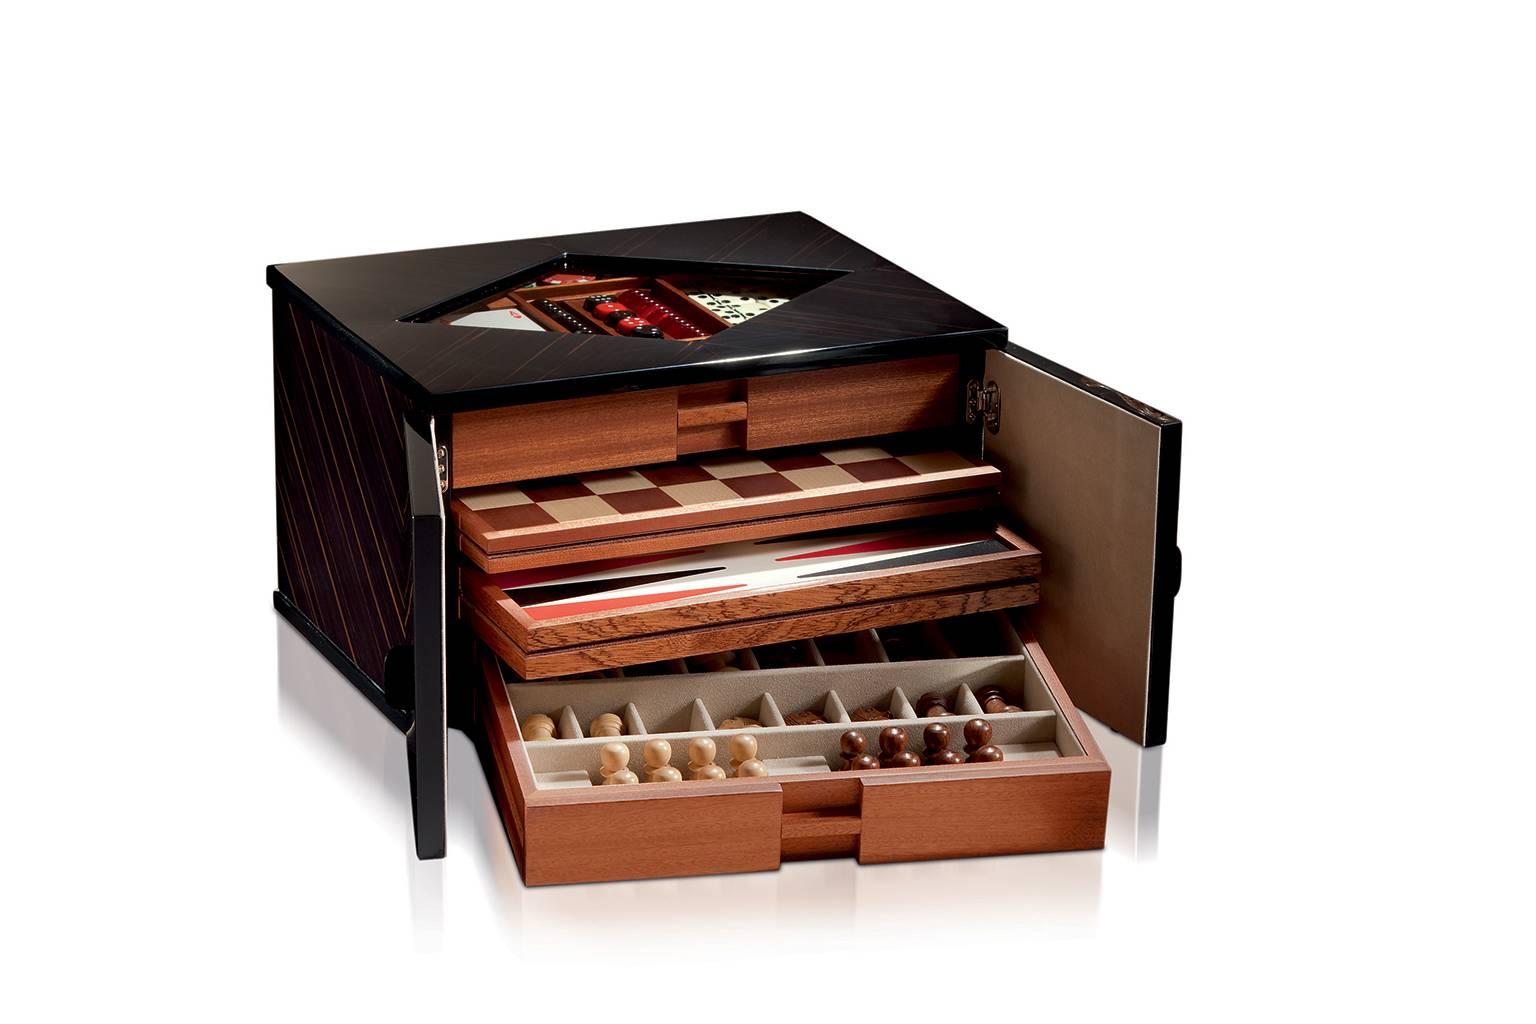 On rainy days or a night with friends, bring Las Vegas to your living room. Our multi-game set features: Chess with 8,3 Staunton Chessmen, Checkers, Backgammon, Dominoes, Cards, Poker Dice and 170 poker chips. Polished ebony meet with Nickel